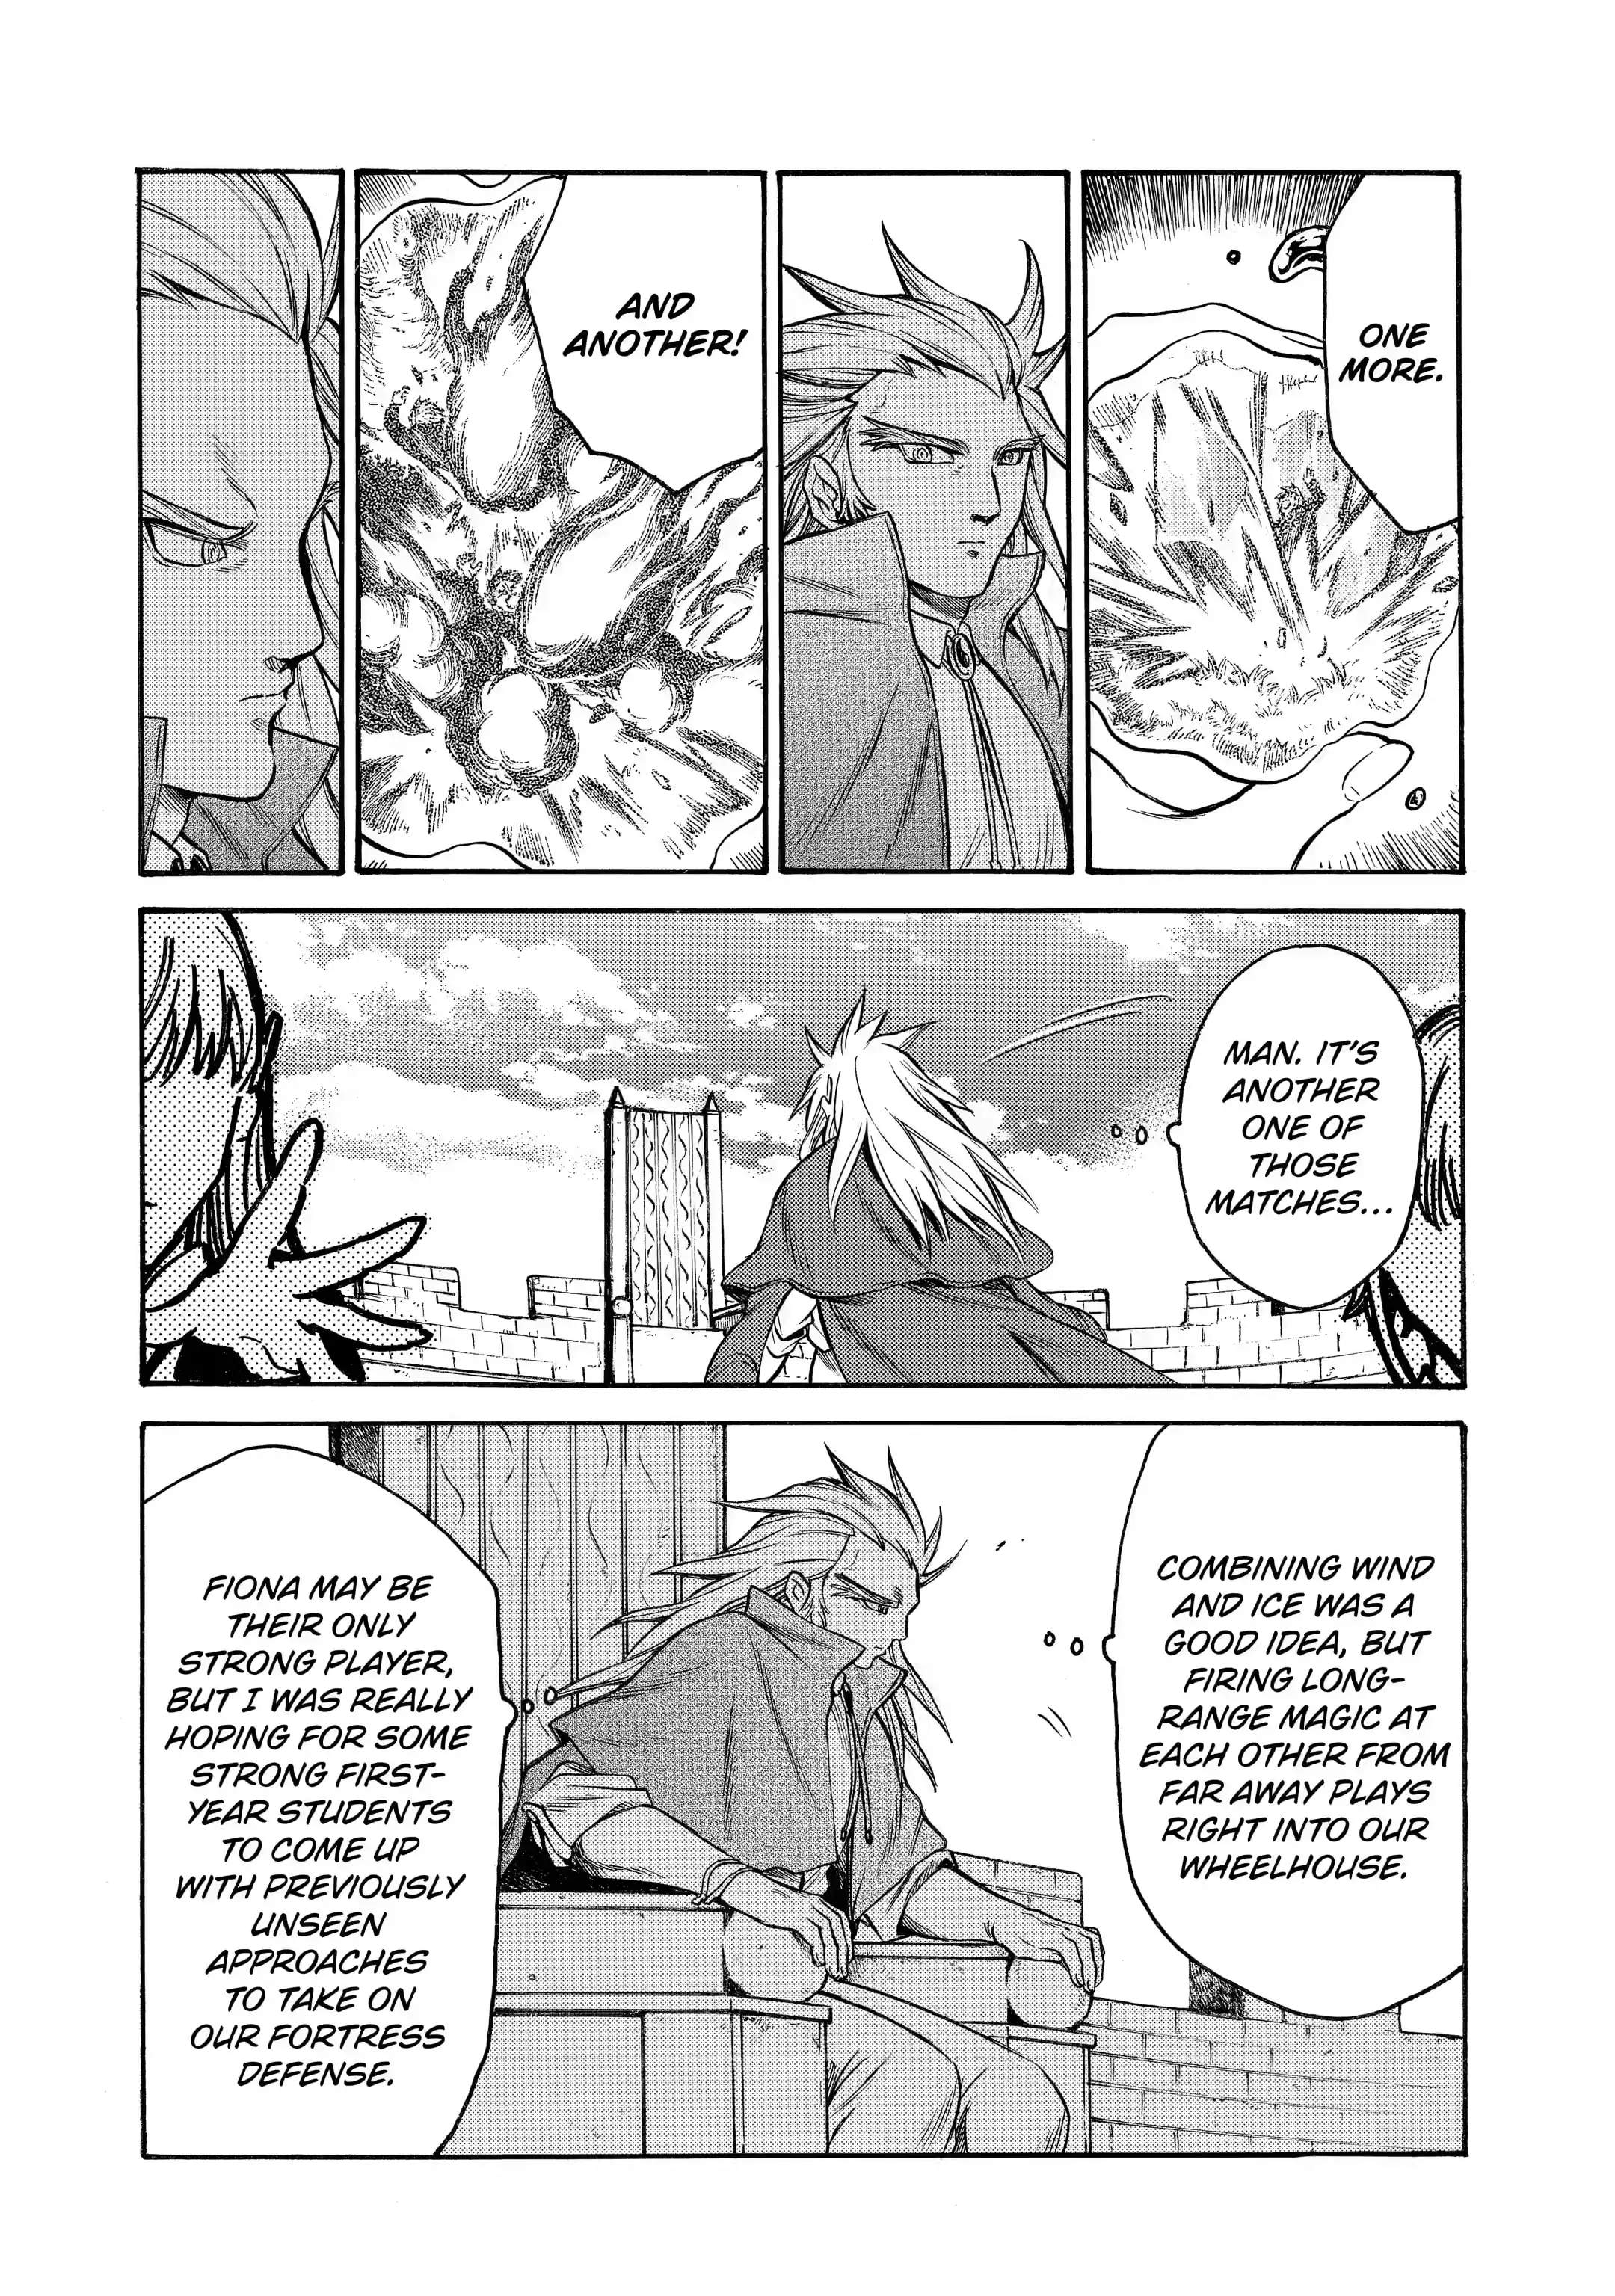 Reincarnation of the Unrivalled Time Mage: The Underachiever at the Magic Academy Turns Out to Be the Strongest Mage Who Controls Time! Chapter 15.1-eng-li - Page 8